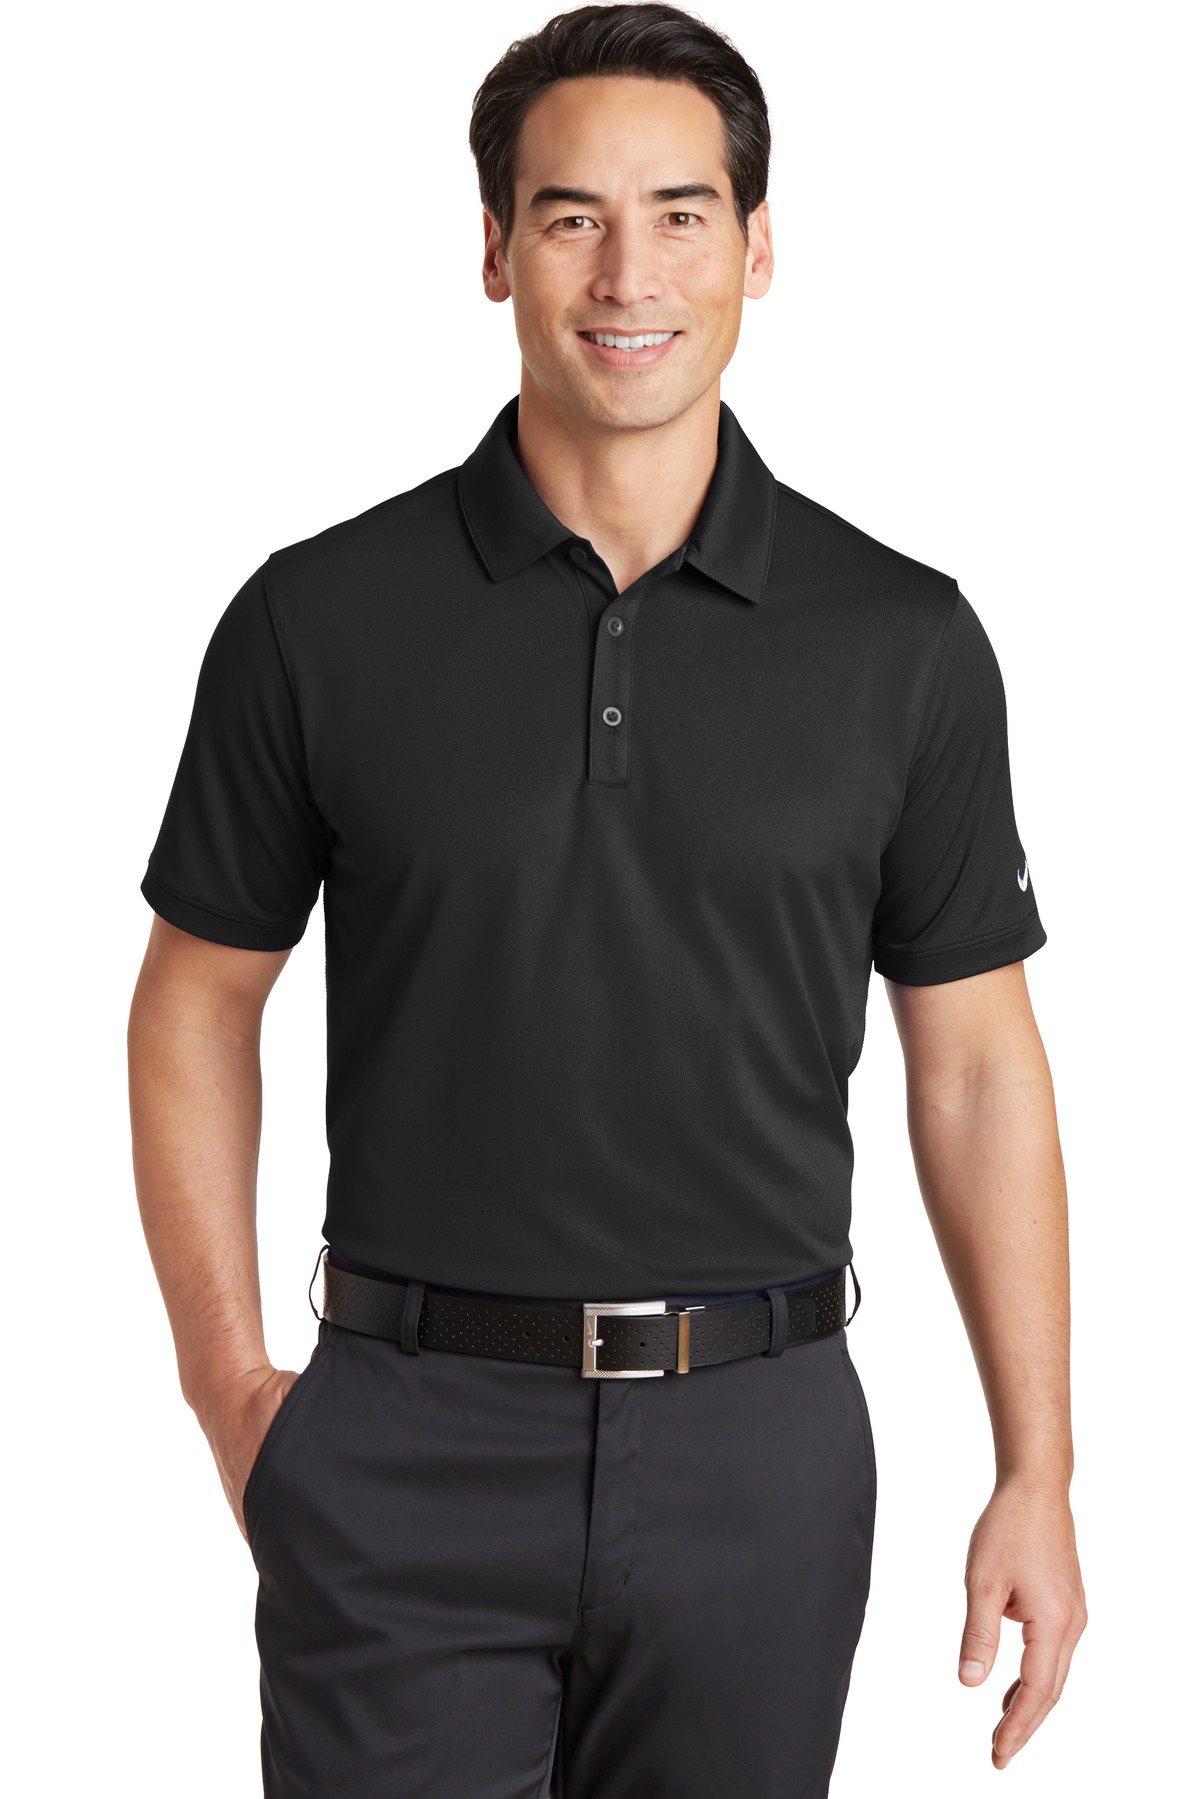 Nike Hospitality Polos & Knits Dri-FIT Solid Icon Pique Modern Fit Polo.-Nike